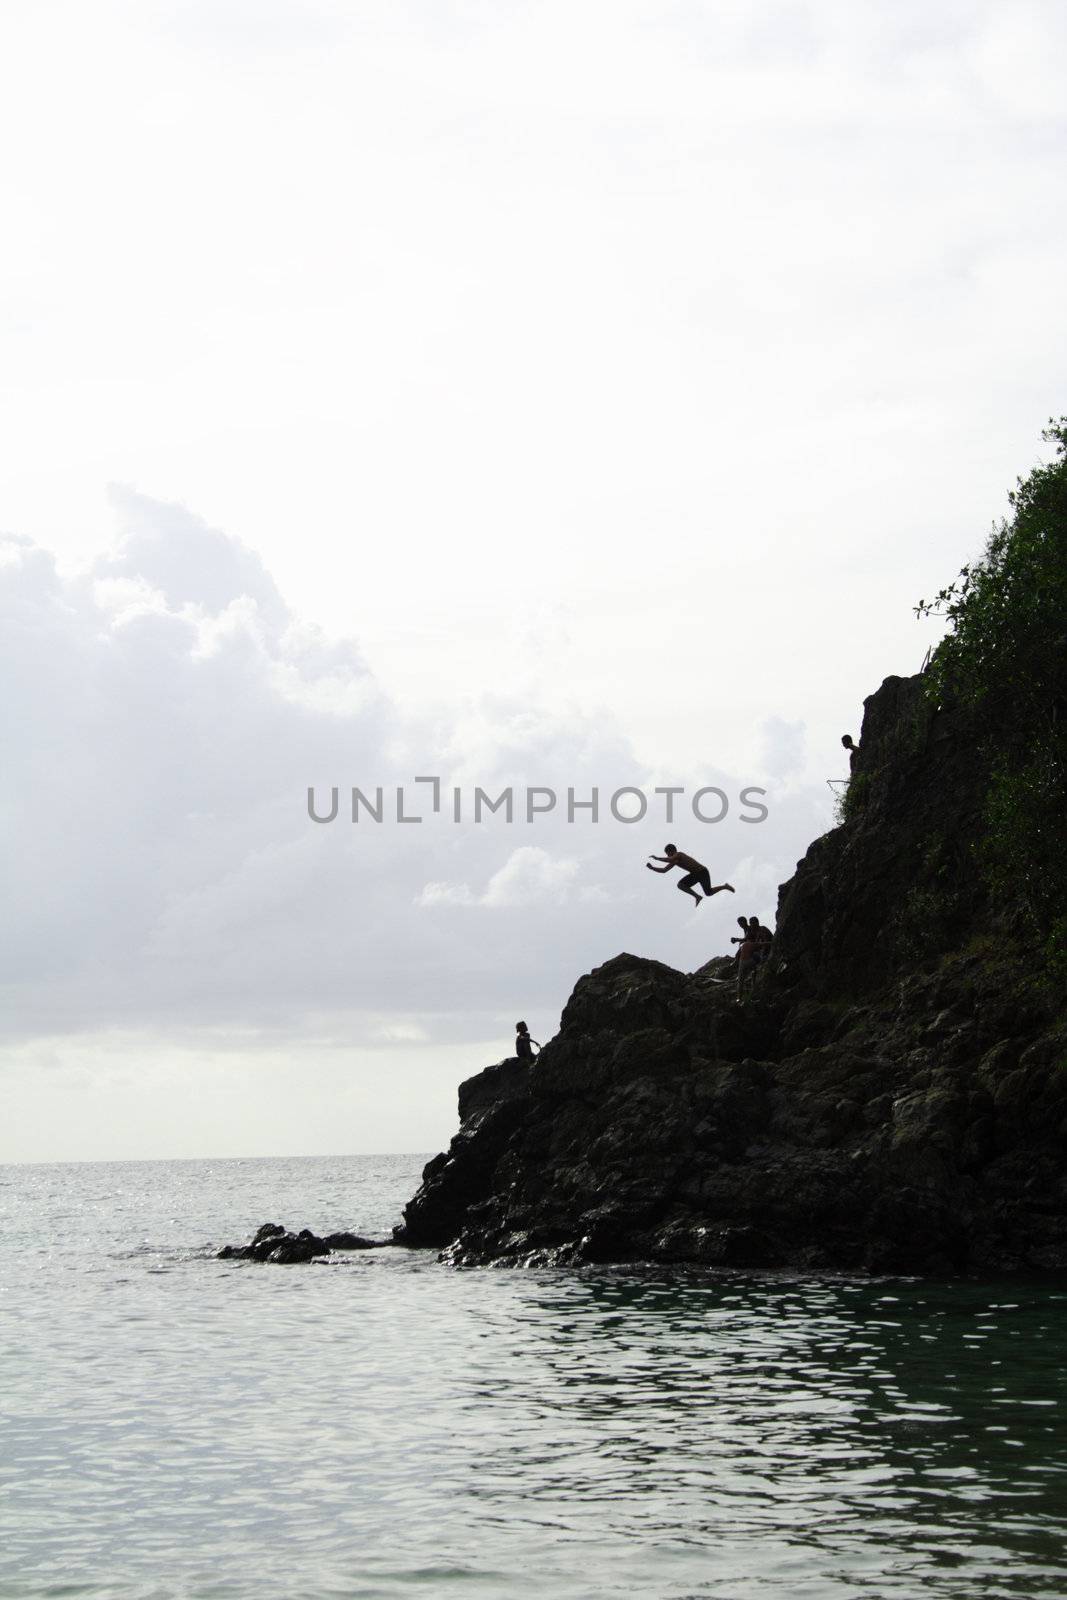 Jumping off a rock into the ocean, silhouette.